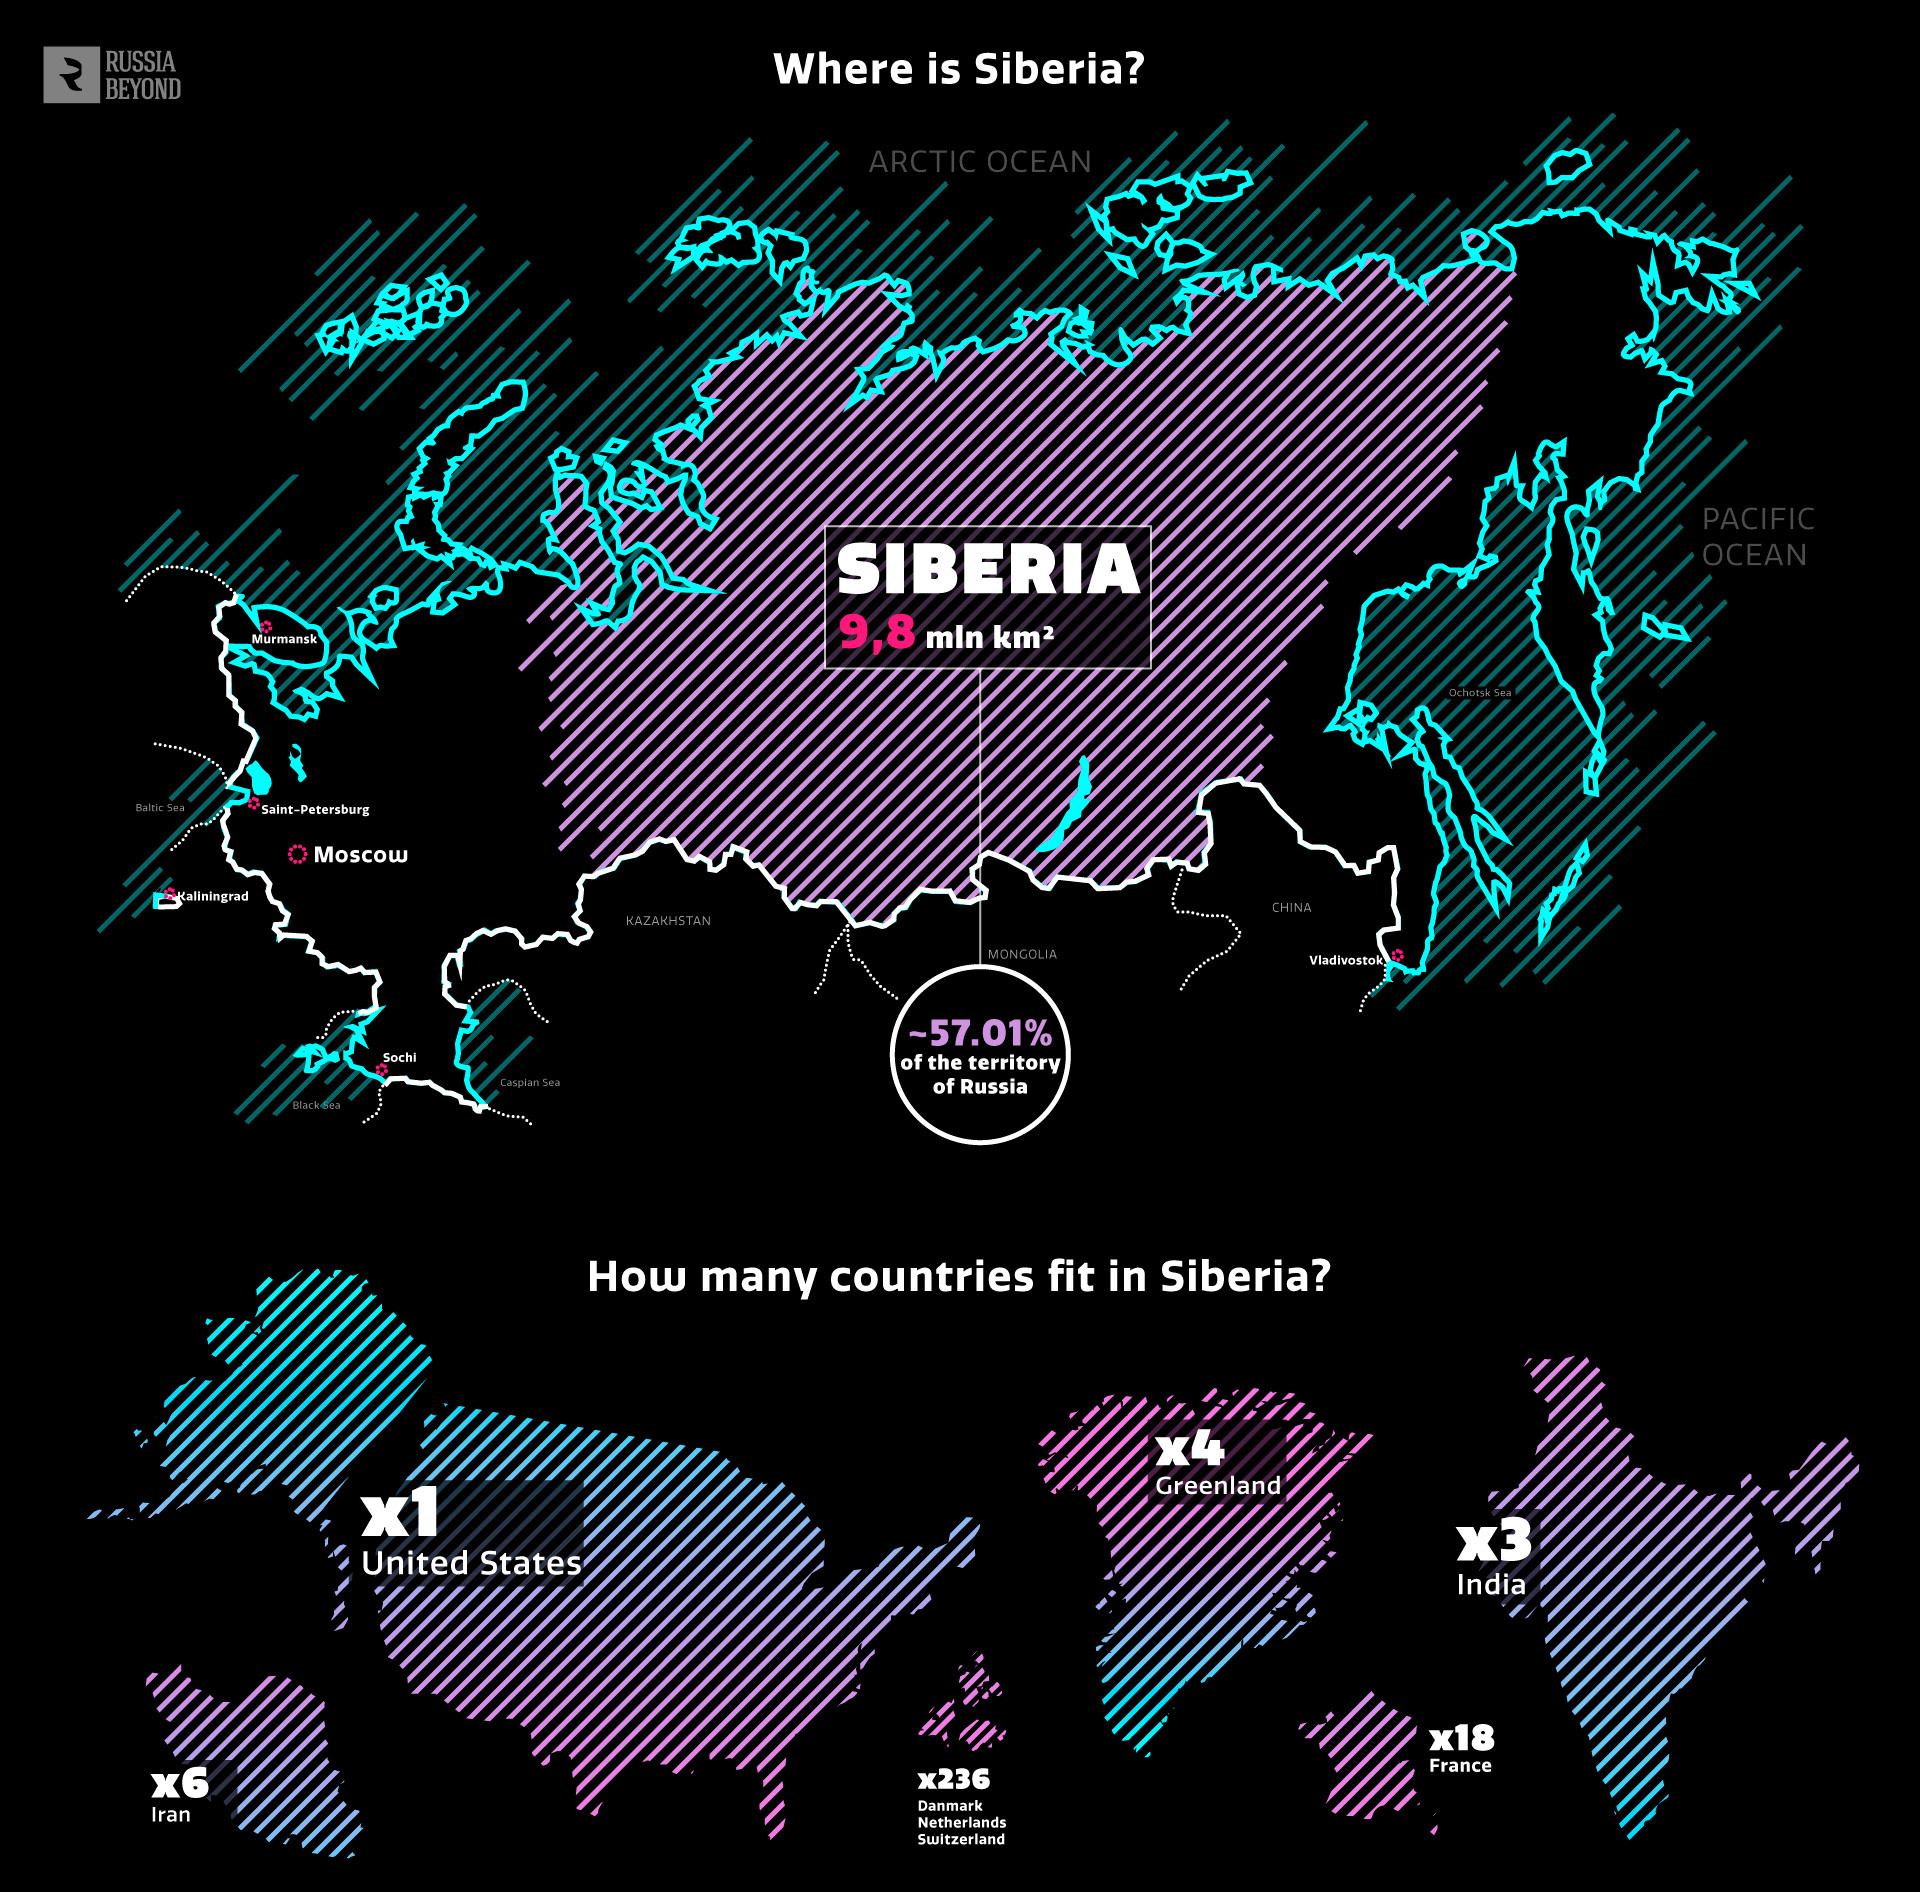 Siberia occupies 9.8 million square miles. It's enough to contain 18 countries the size of France.